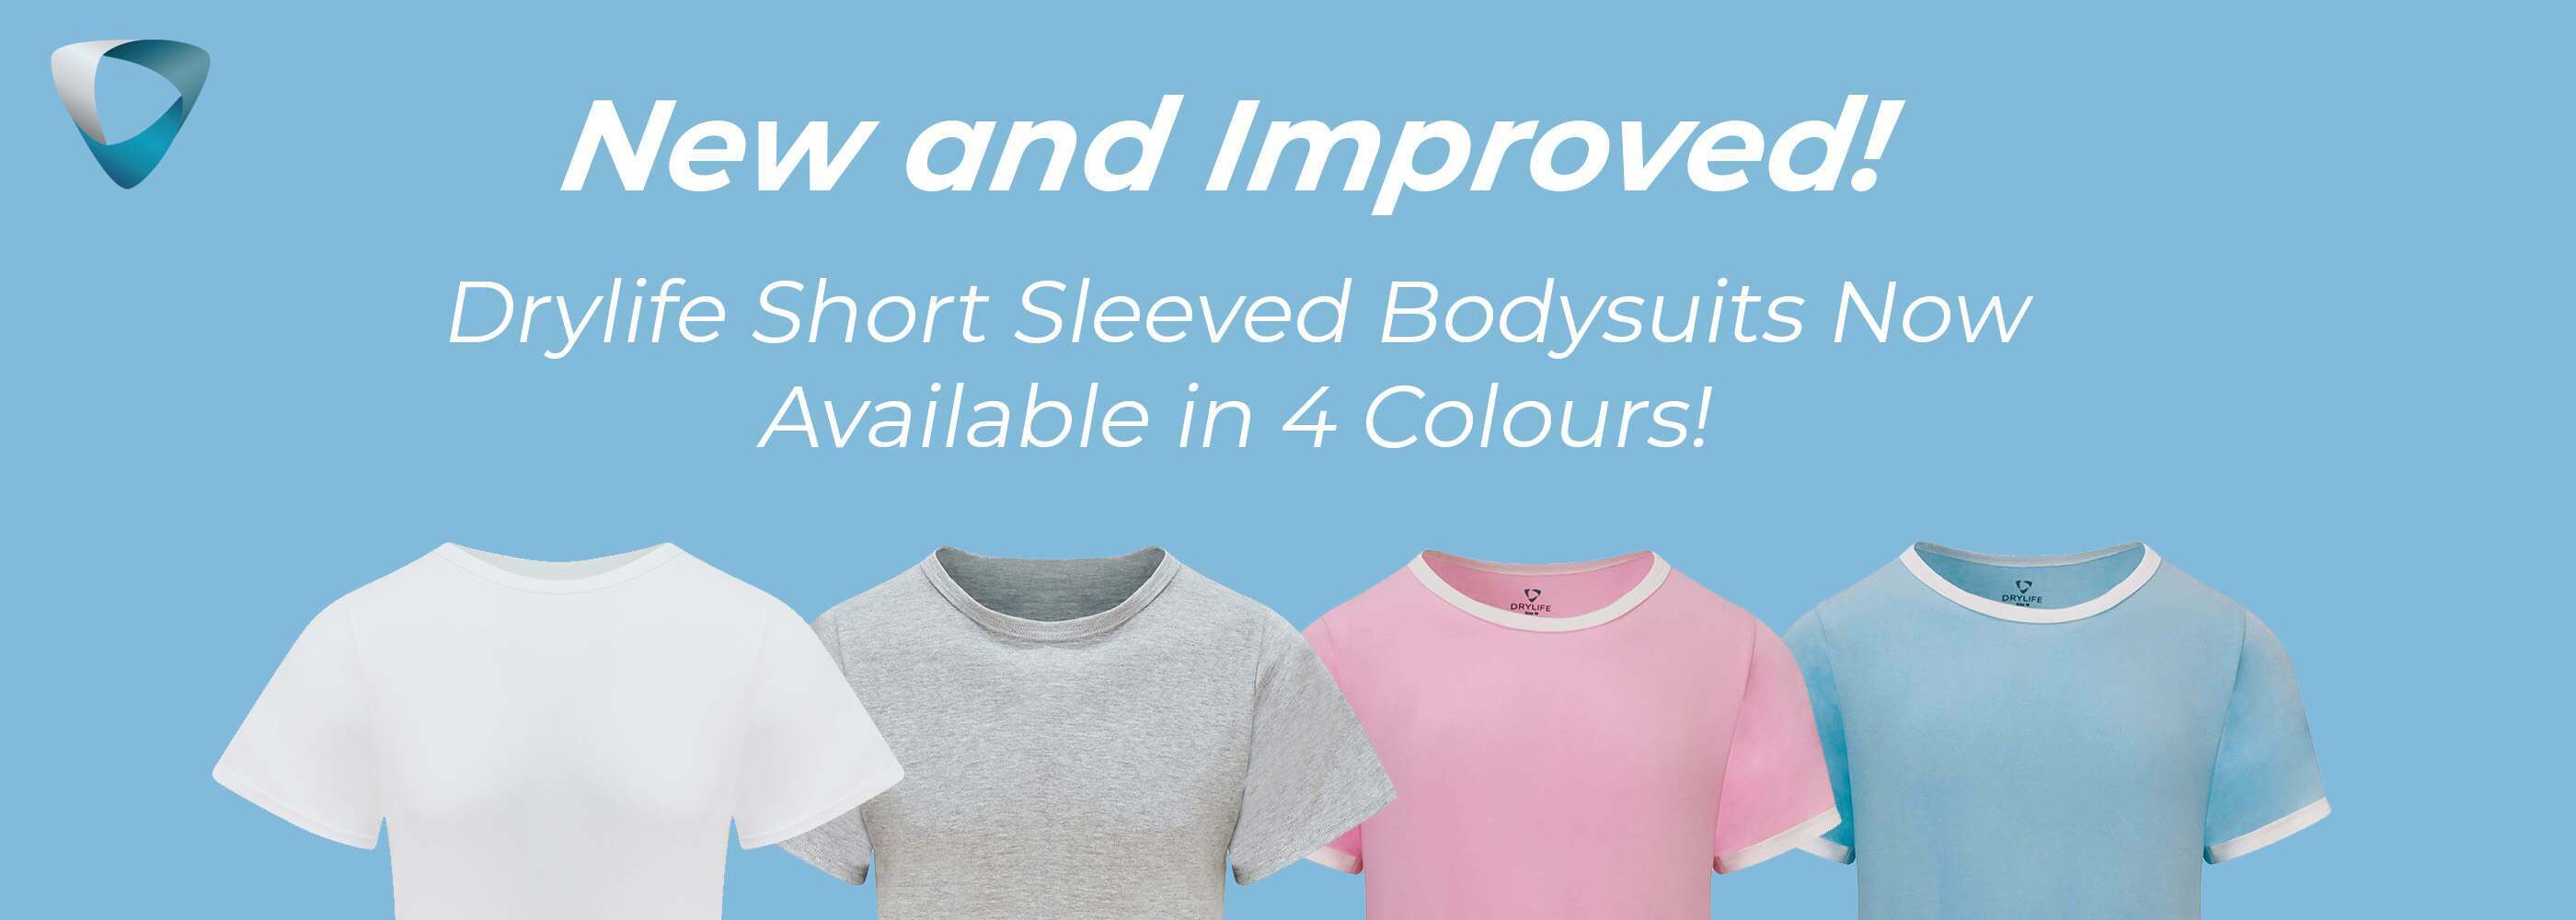 New and Improved Bodysuits Now Available!